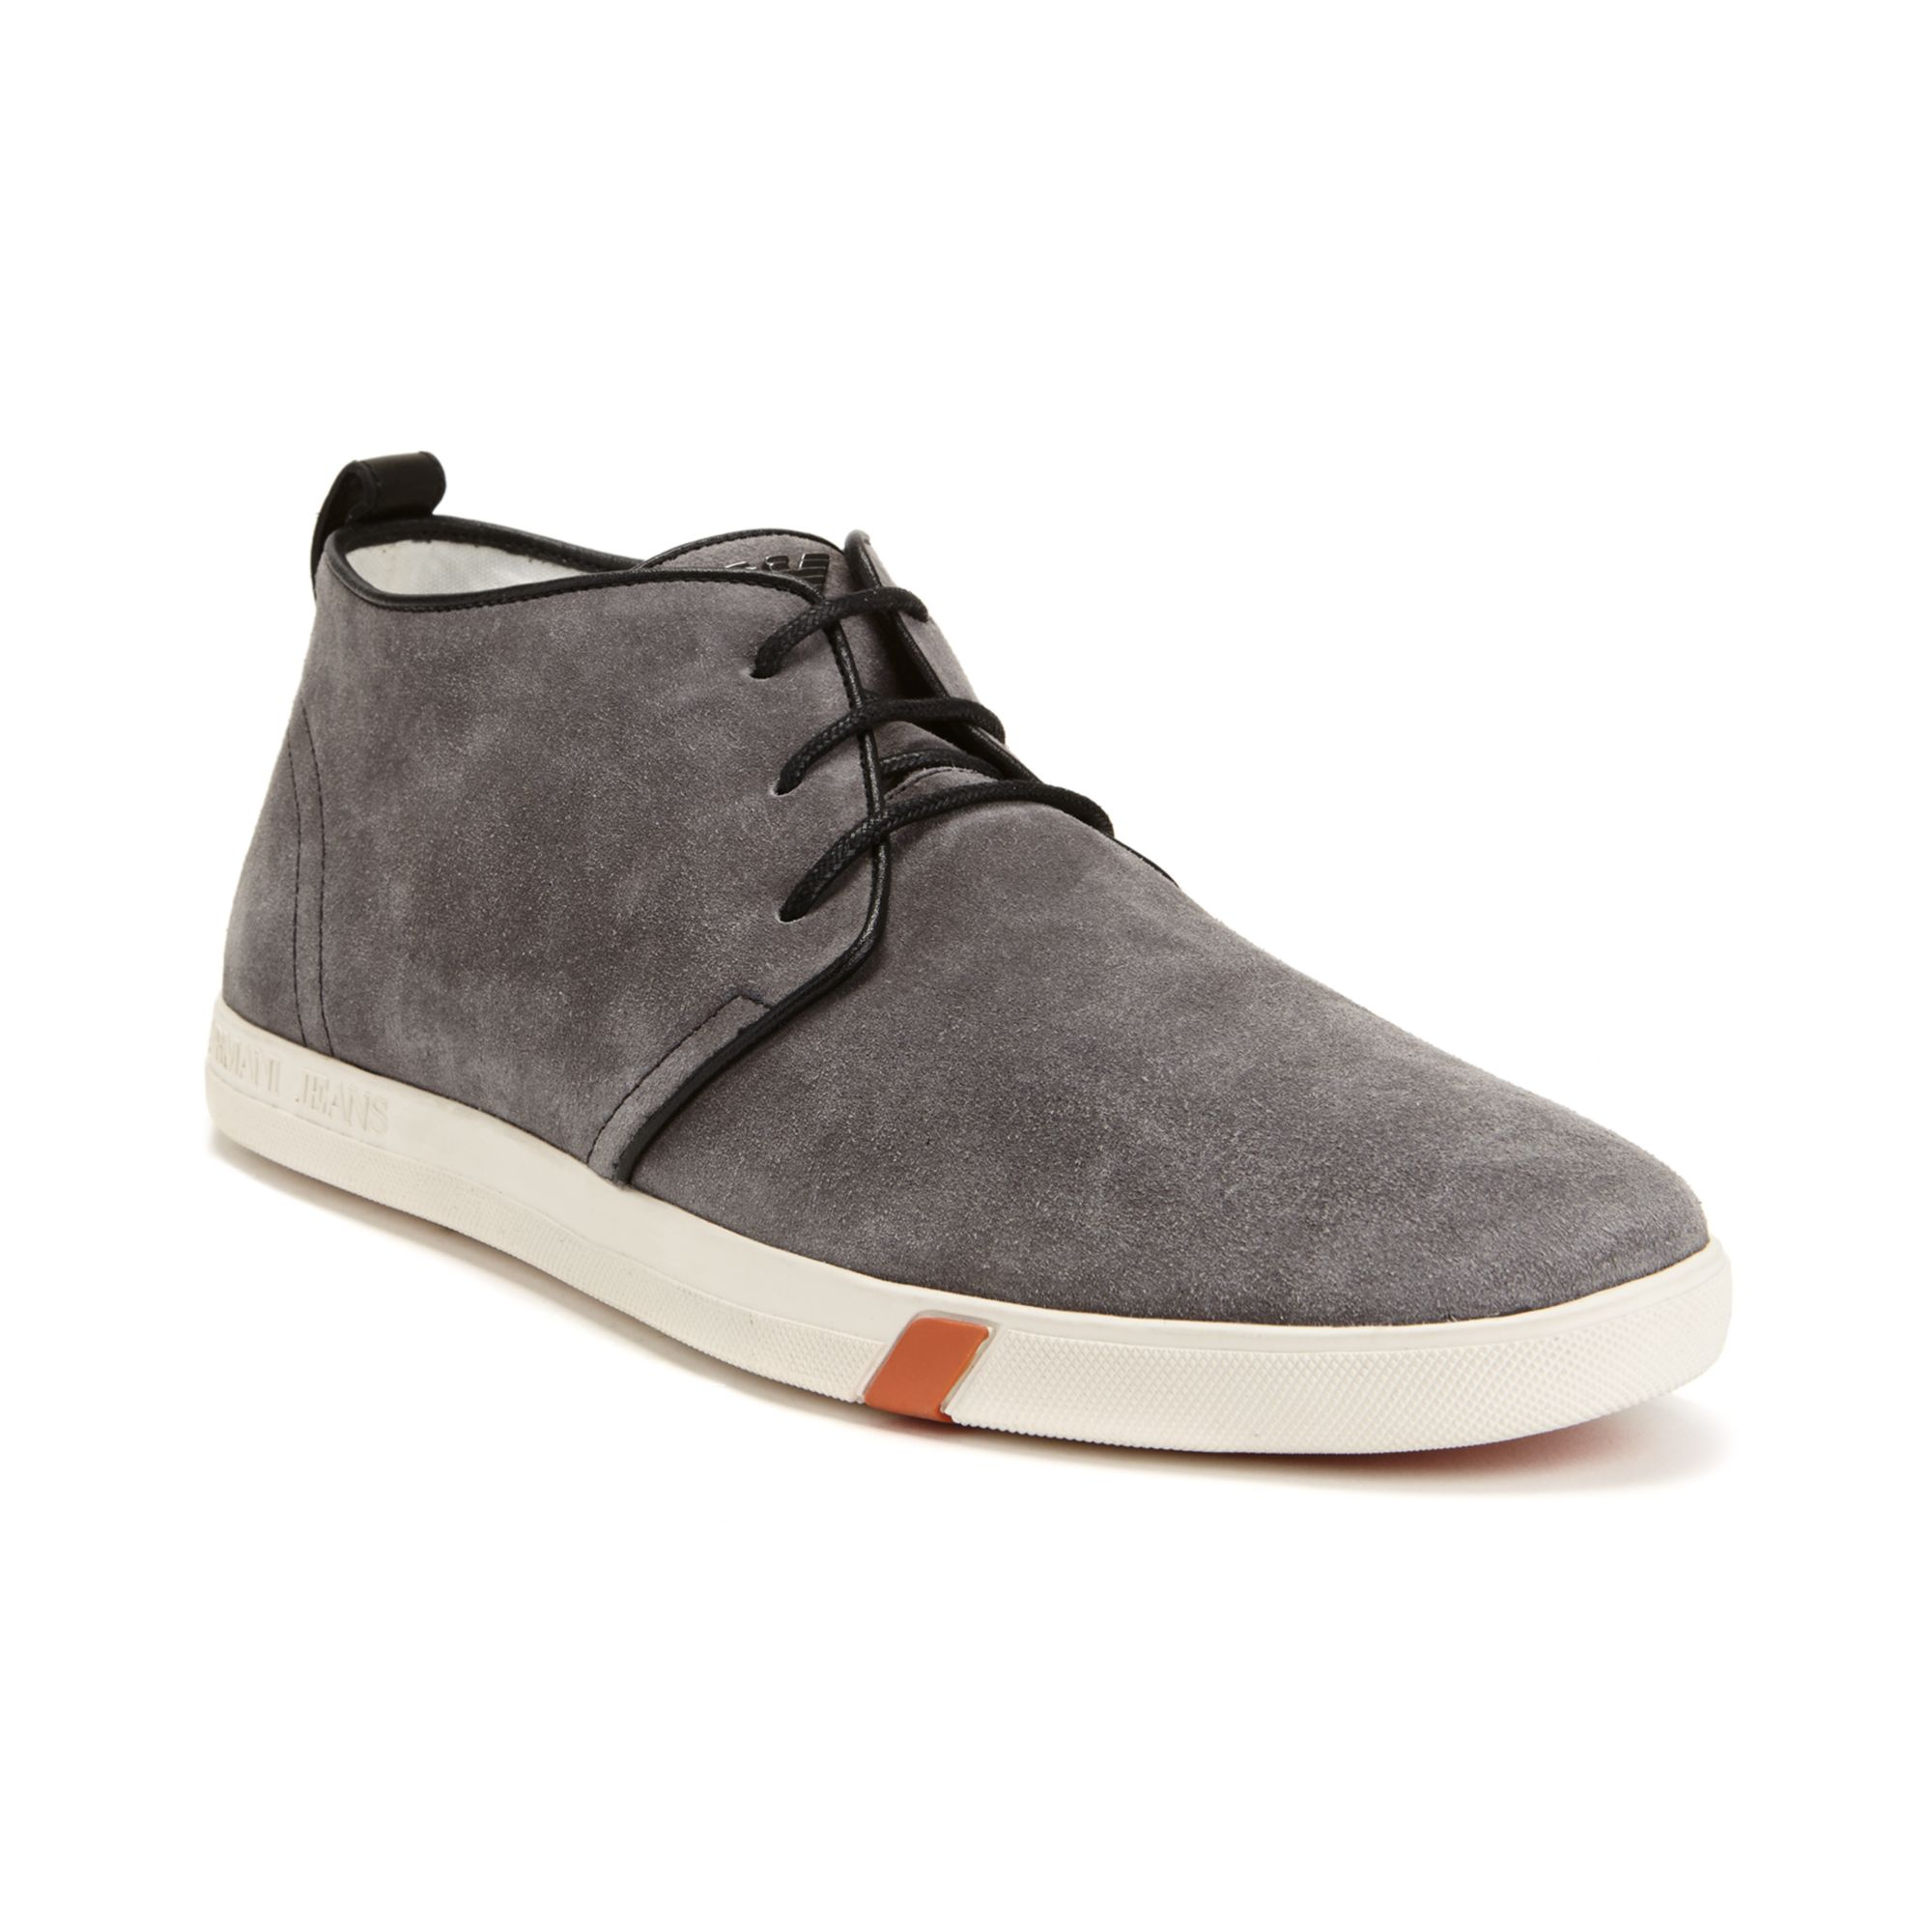 Armani Jeans Suede Chukka Sneakers in 